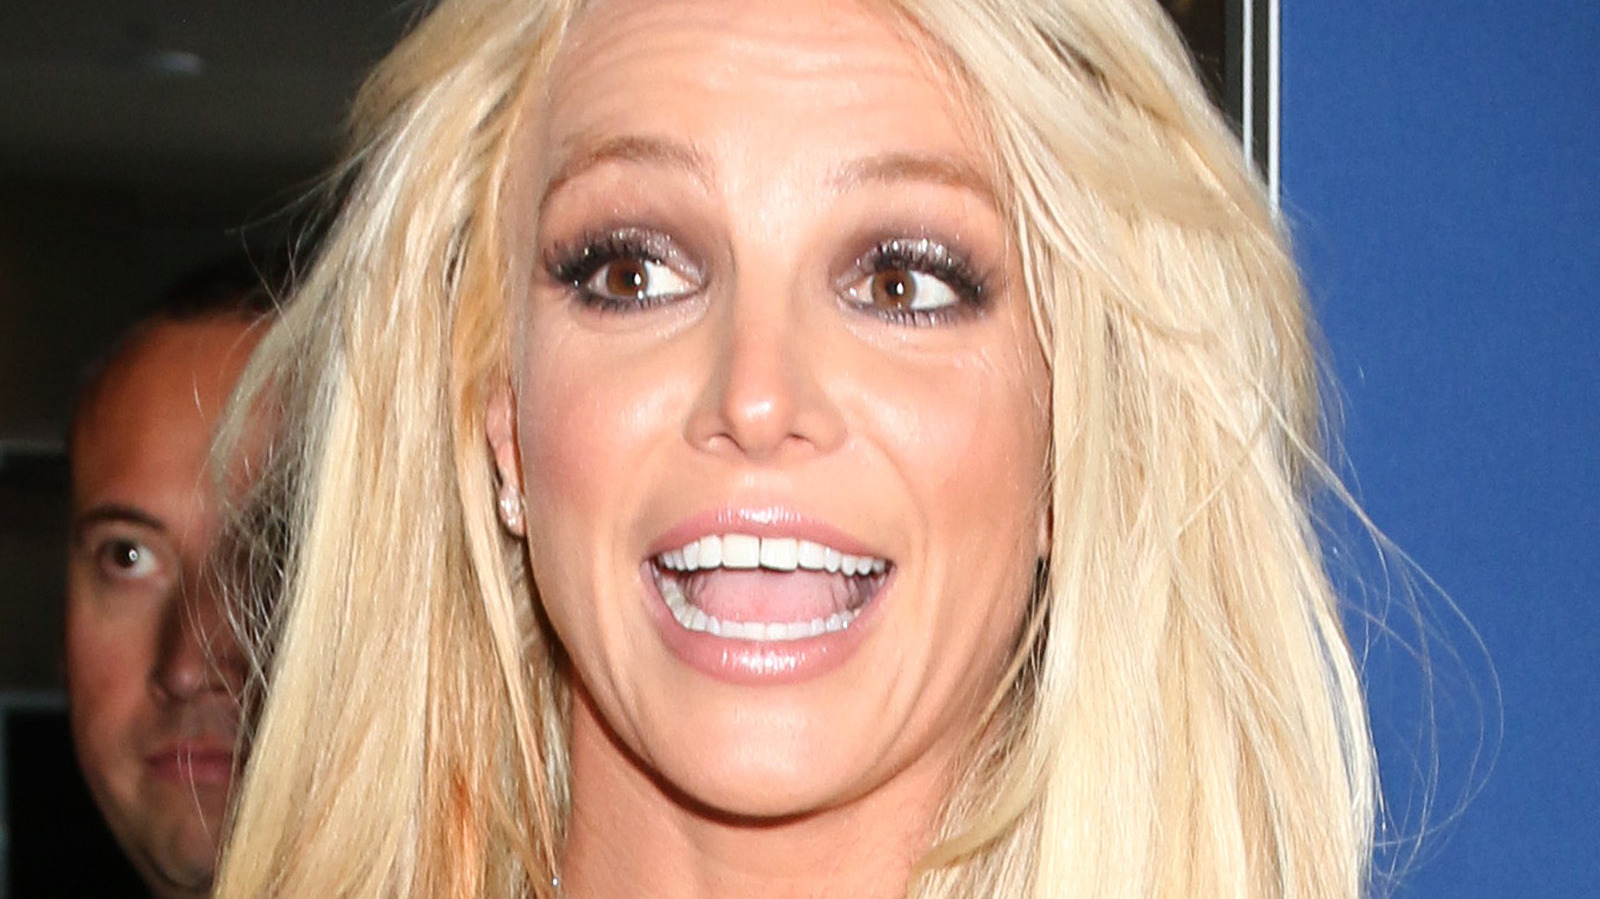 What We Know About Britney Spears' July Conservatorship Hearing